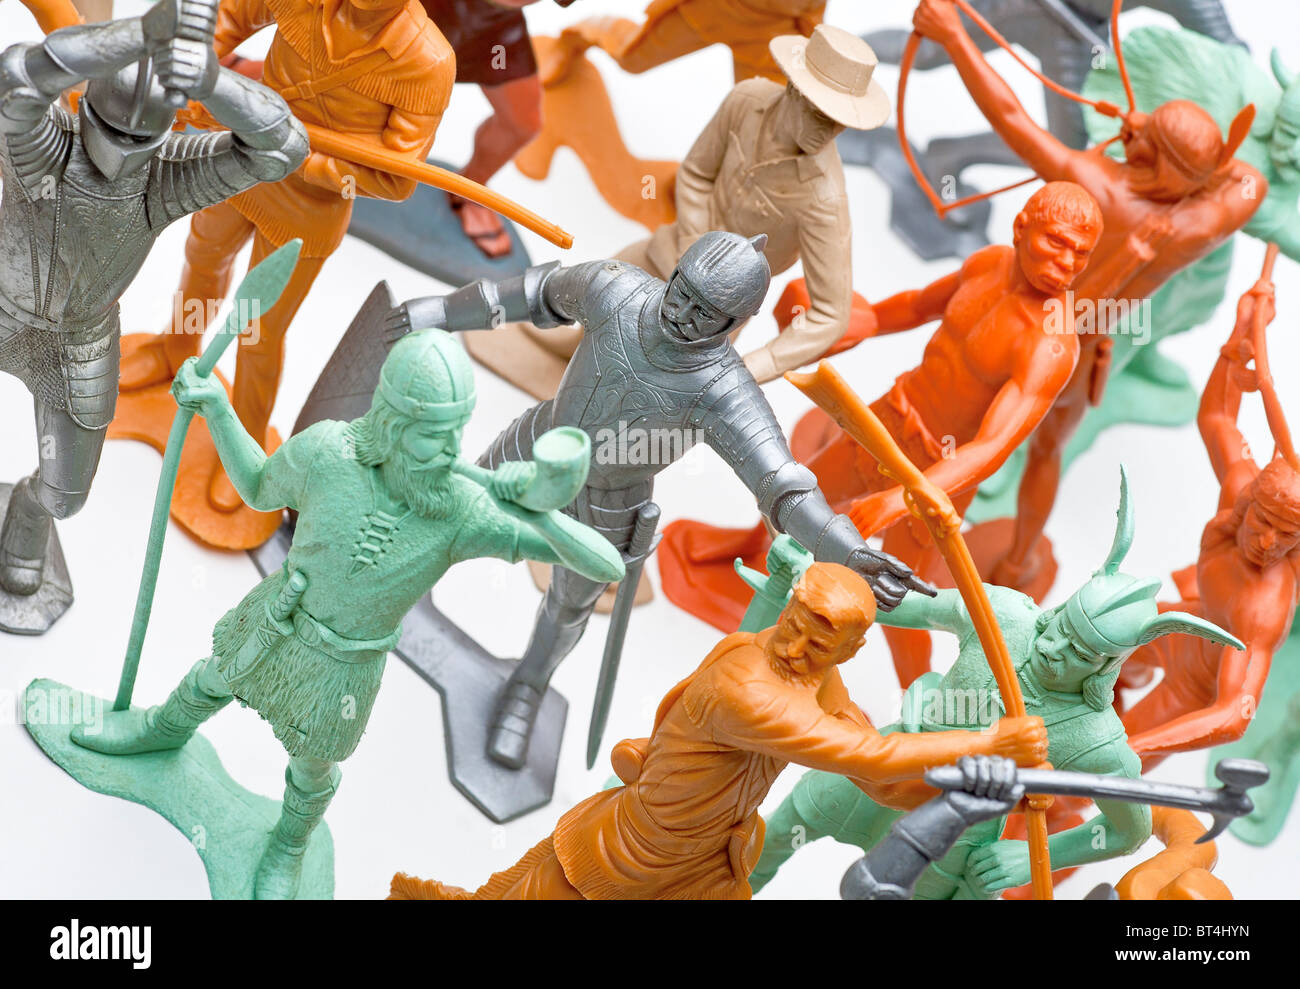 Bunch of Toy Soldiers. Stock Photo